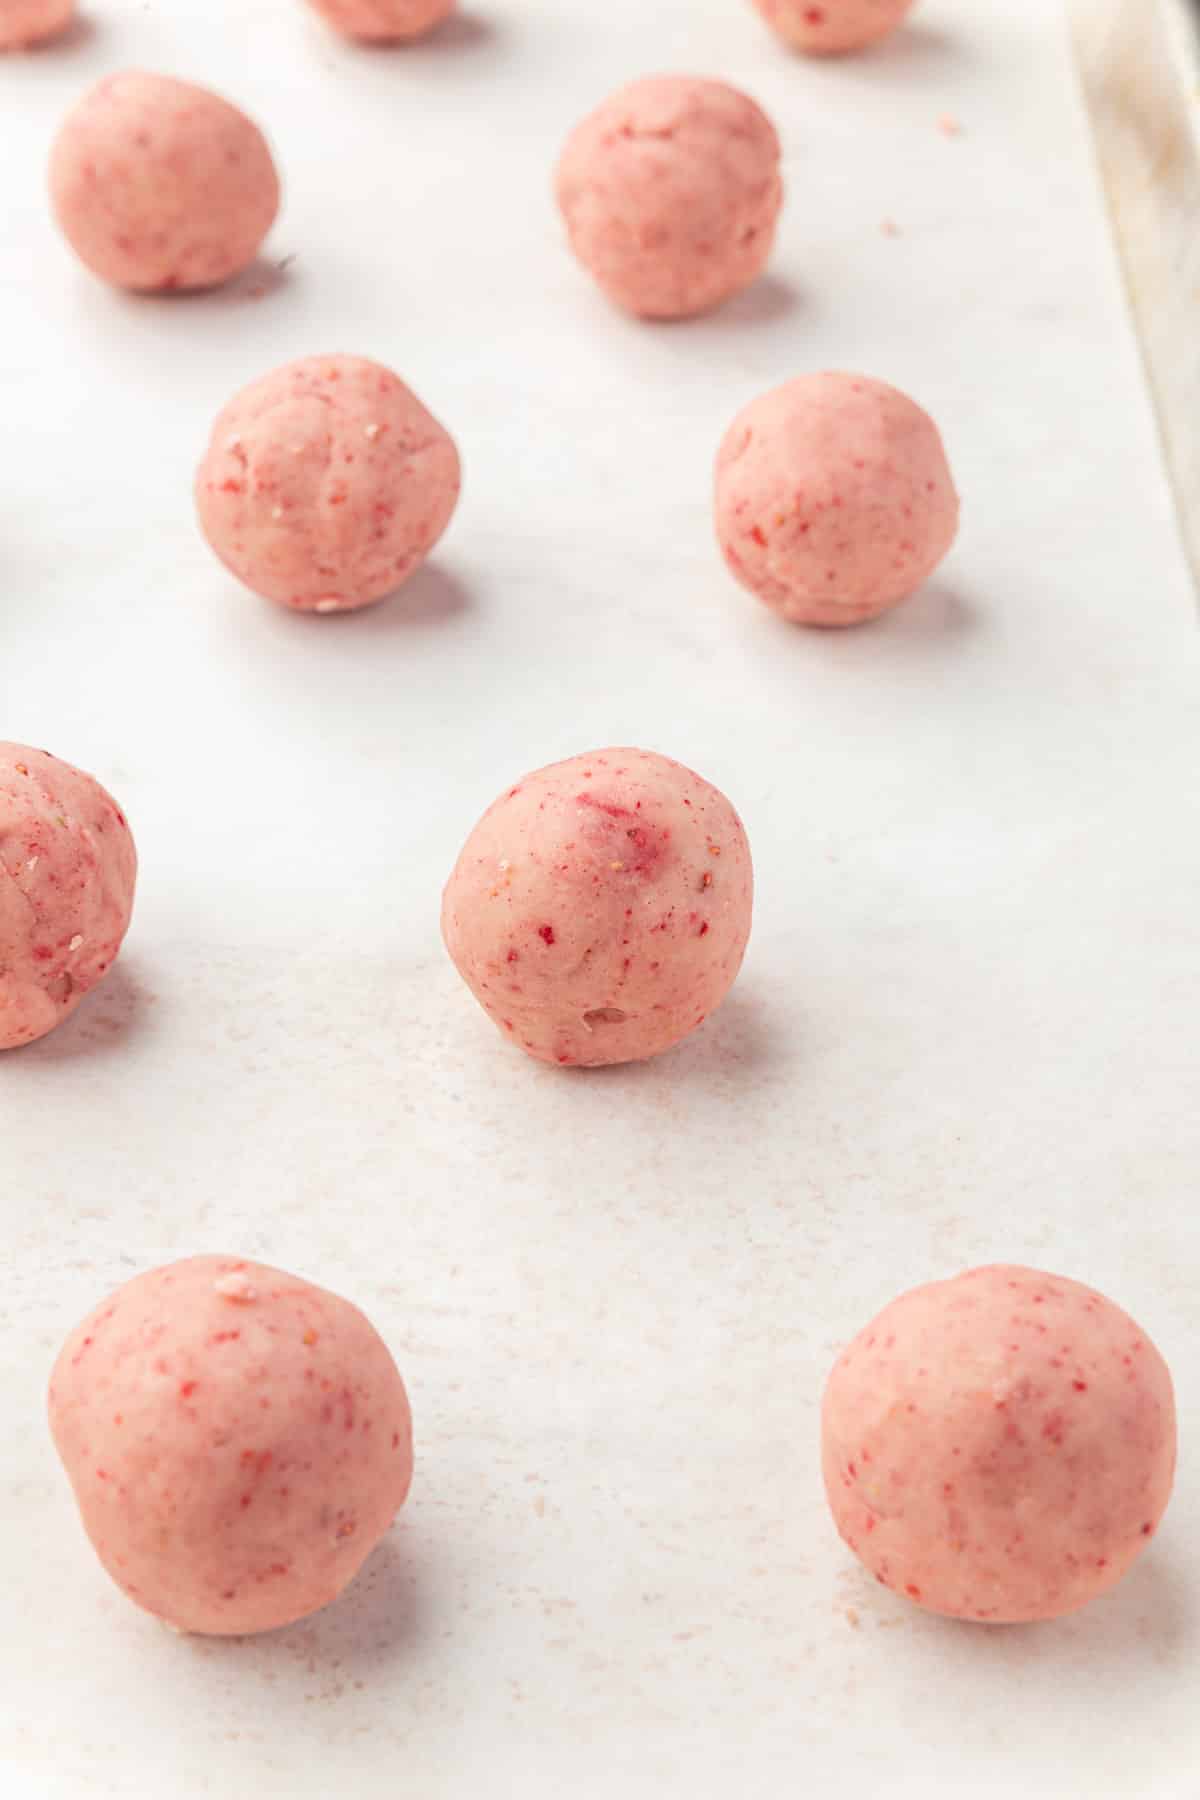 A baking sheet lined with parchment paper with a dozen strawberry truffle balls on it.